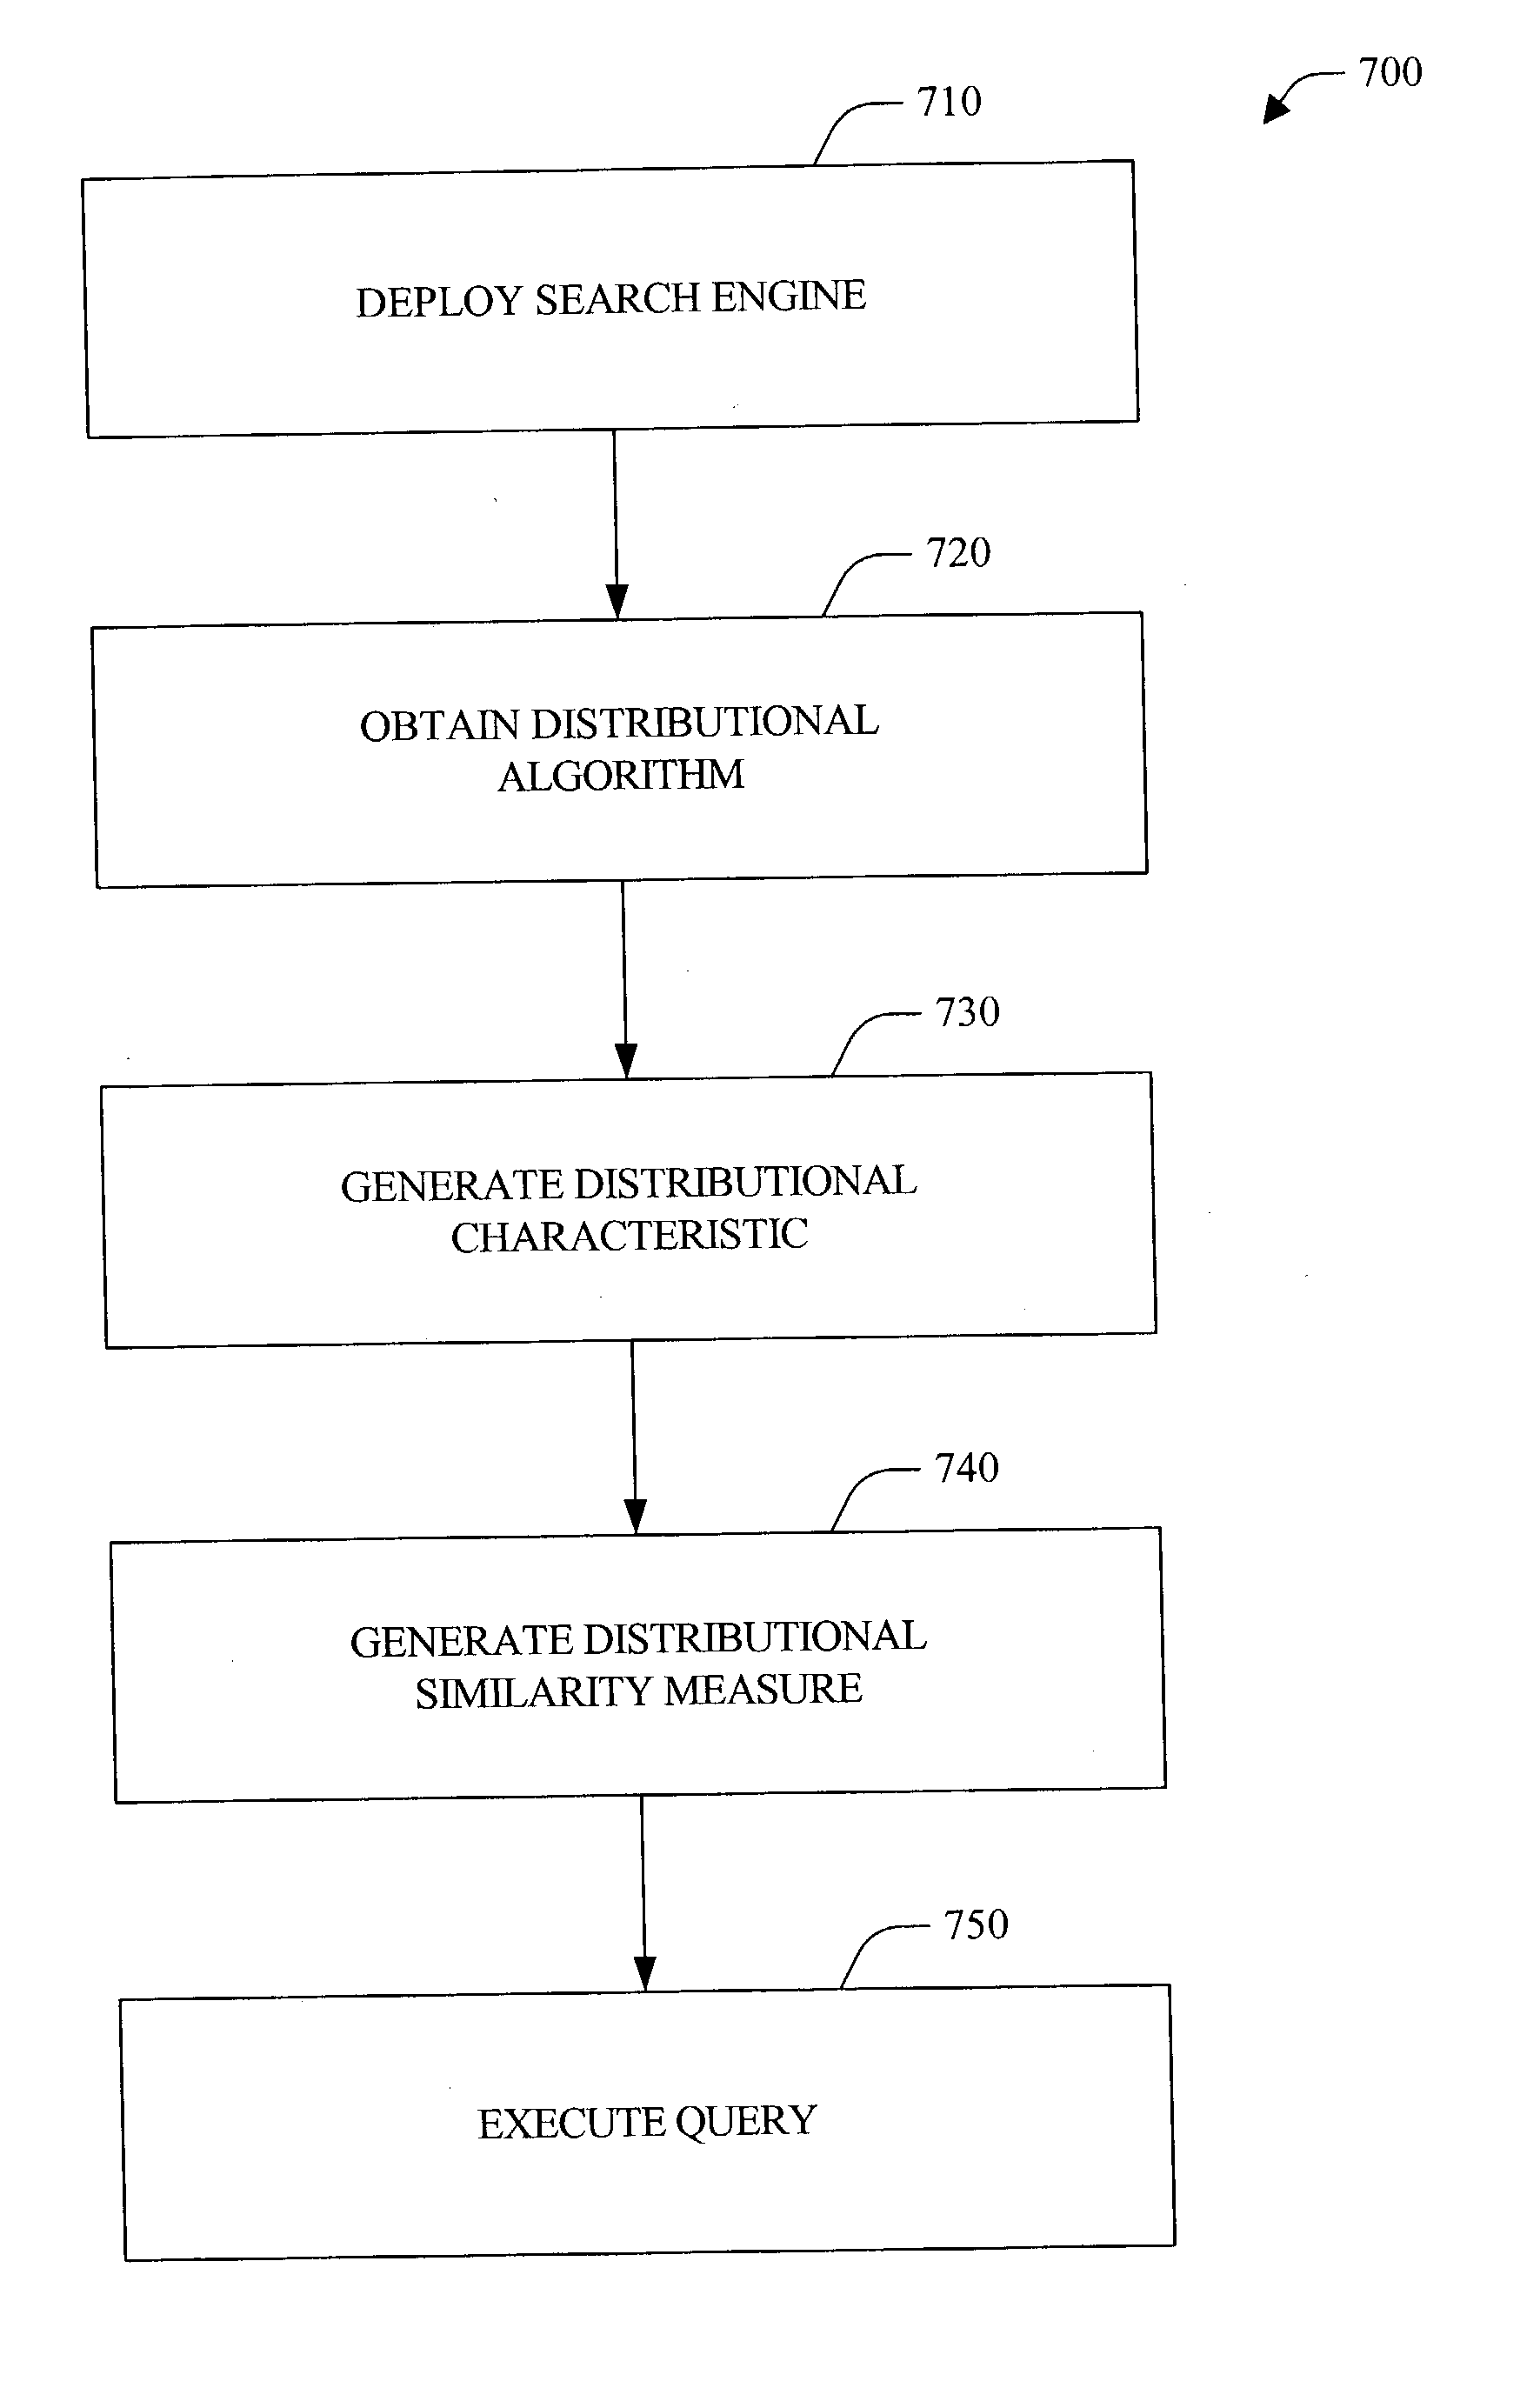 Systems and methods that employ a distributional analysis on a query log to improve search results